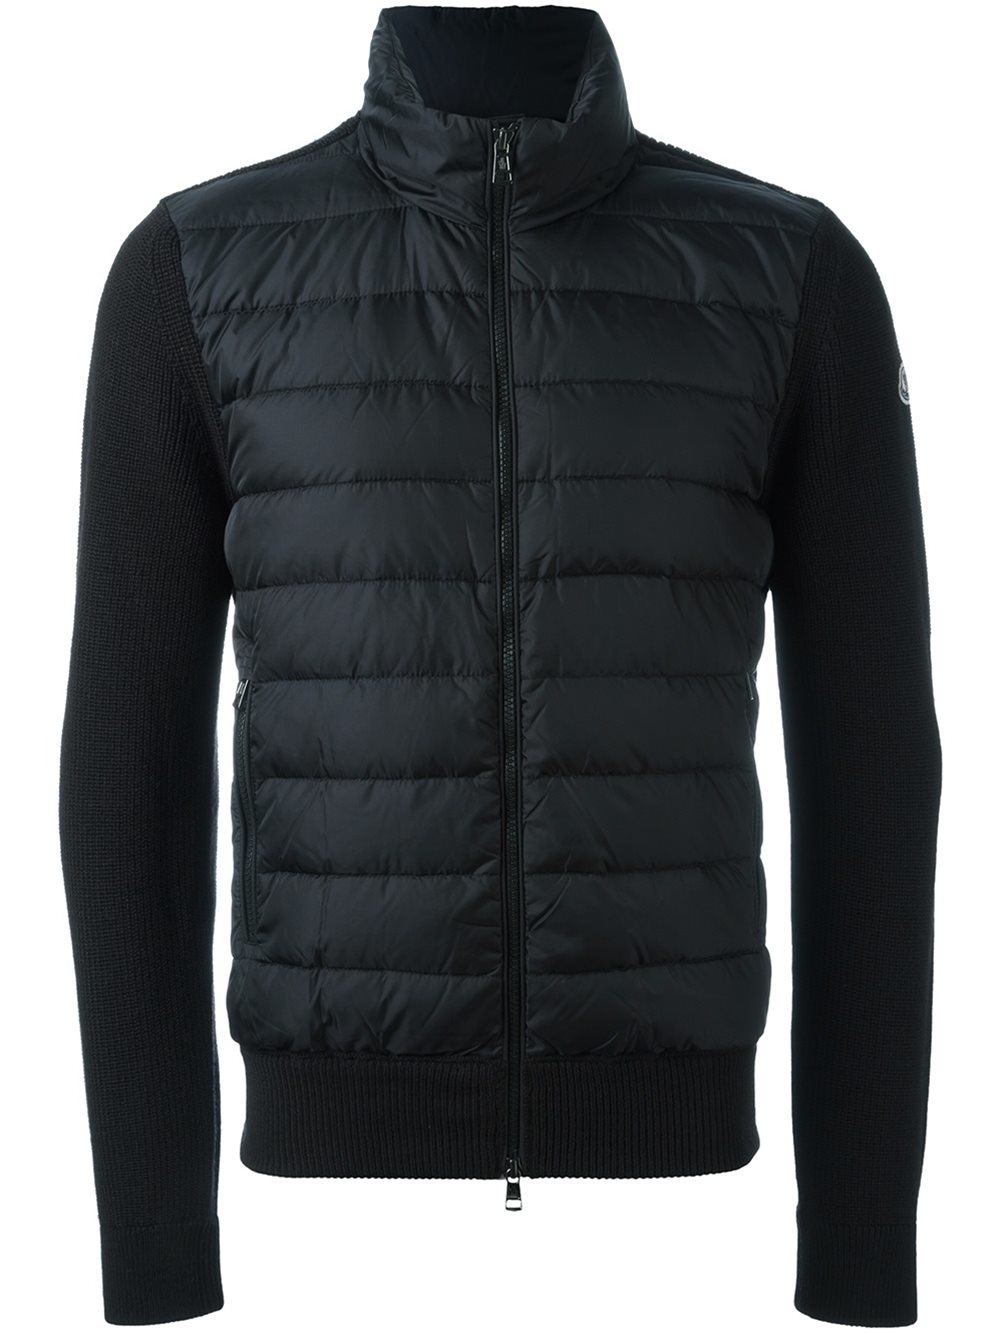 Moncler Wool Knit-sleeve Padded Jacket in Black for Men - Lyst